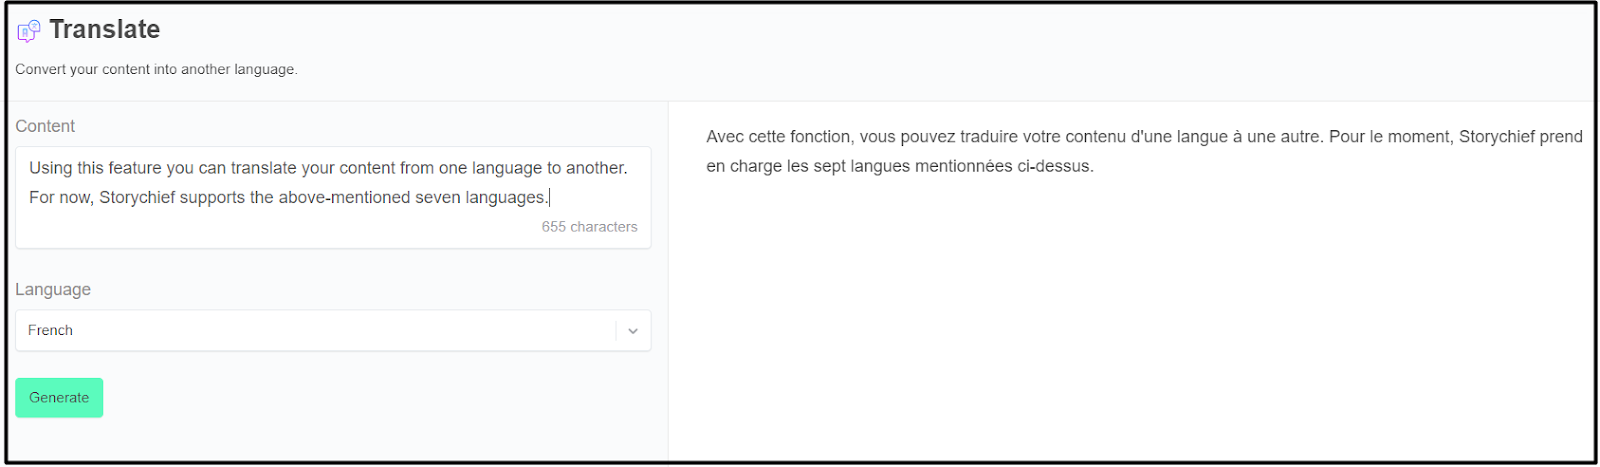 Translate feature in Storychief AI Mode